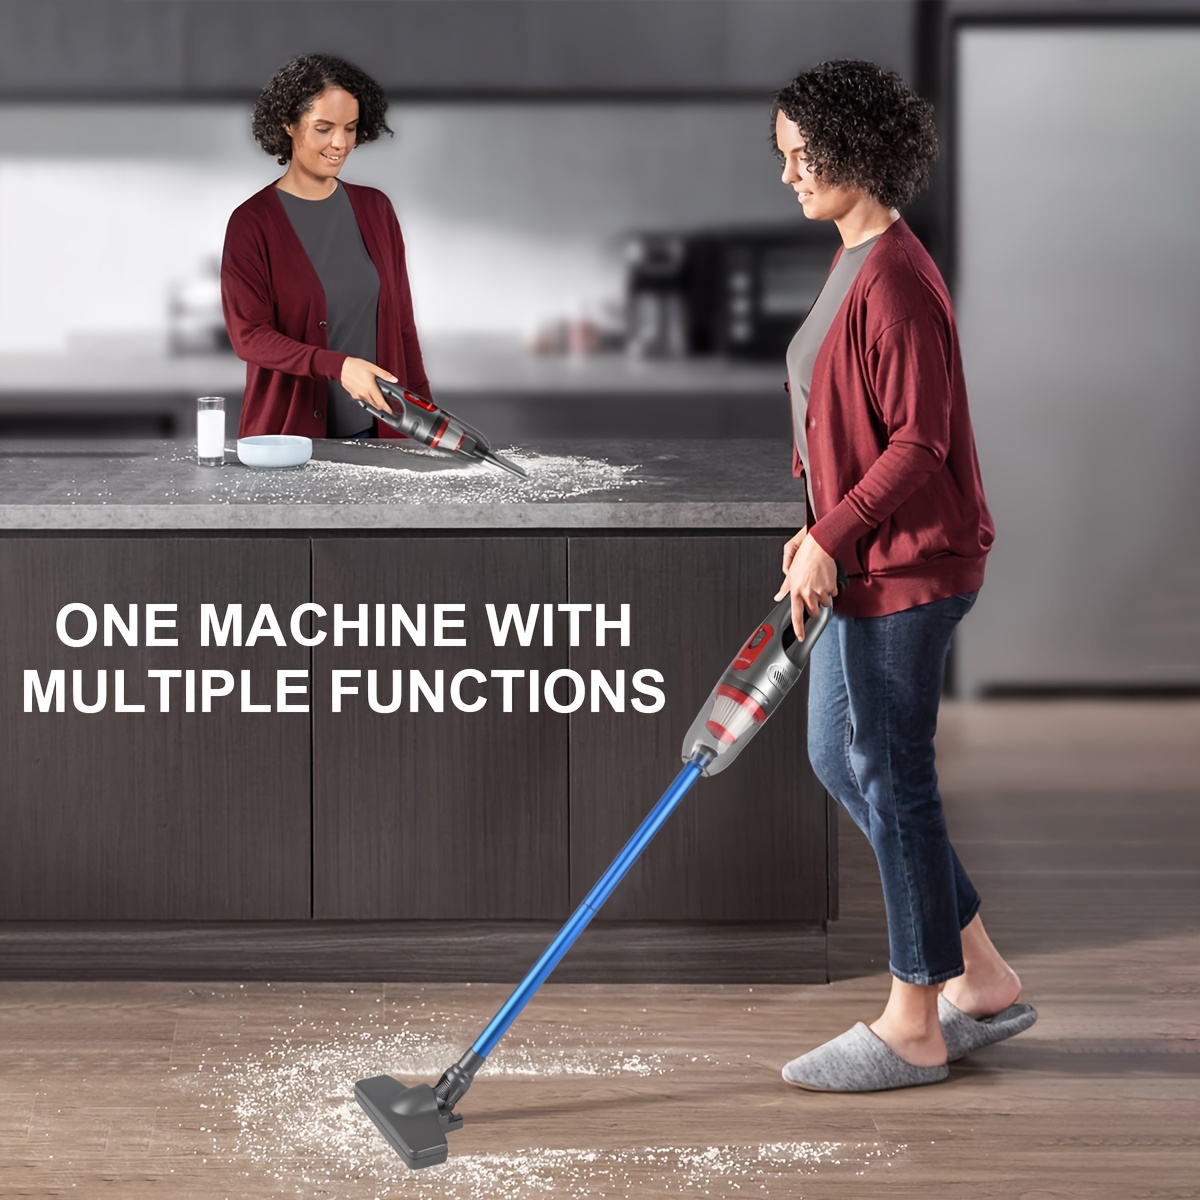 

Quick Clean Cordless Vacuum Cleaner, Powerful Suction Vacuum With 5 In 1, Lightweight Stick Vacuum, Rechargeable Battery Vacuum Cleaner Mini For Home Hard Wood Floor